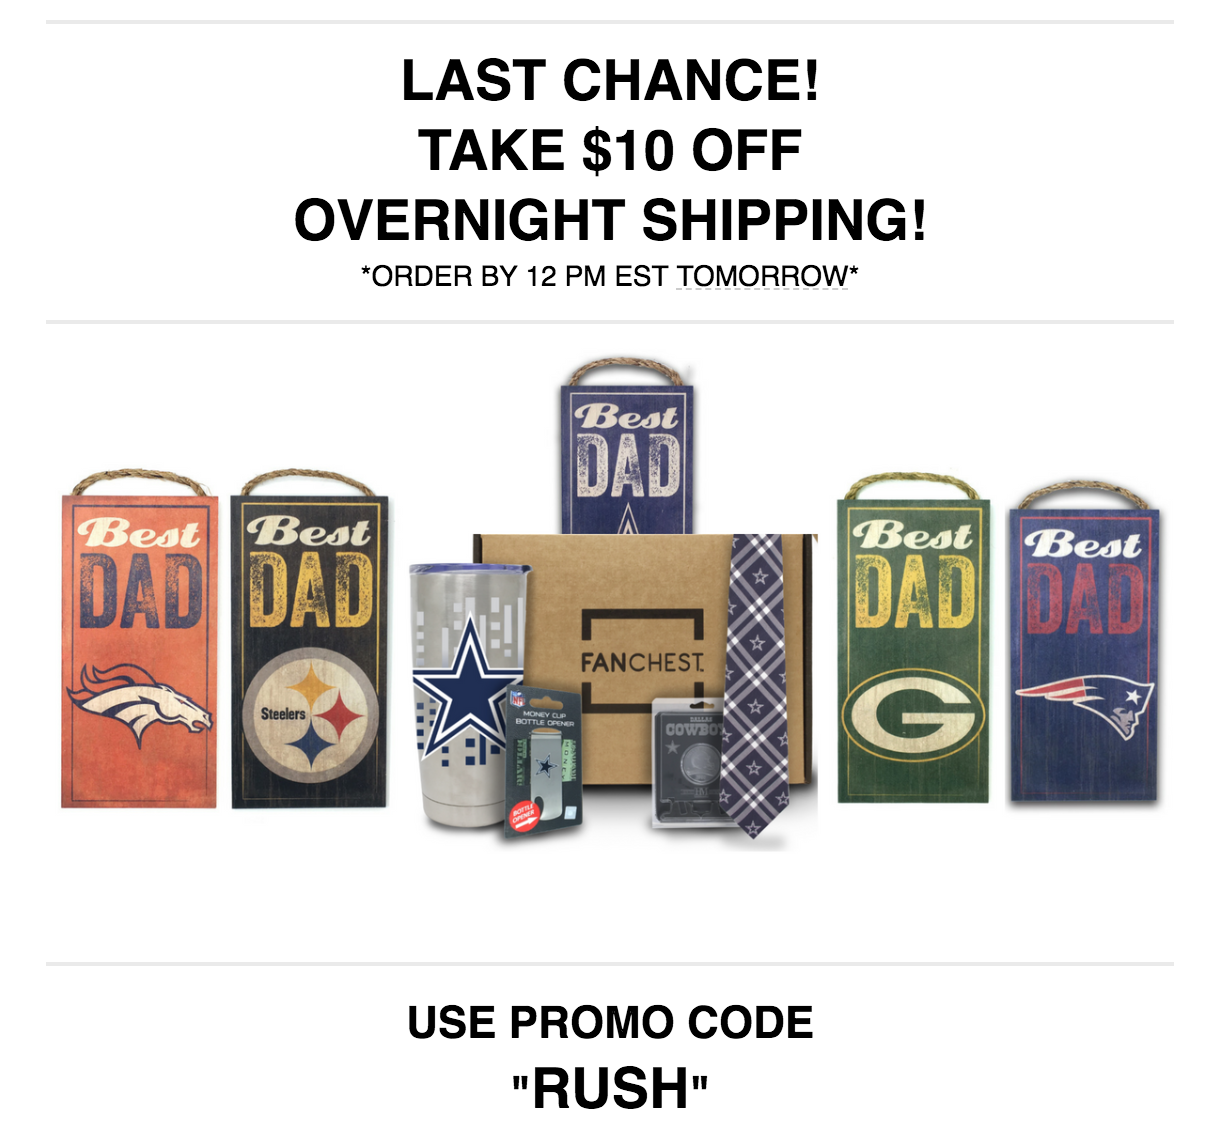 Fanchest Father’s Day Coupon – $10 Off Overnight Shipping!